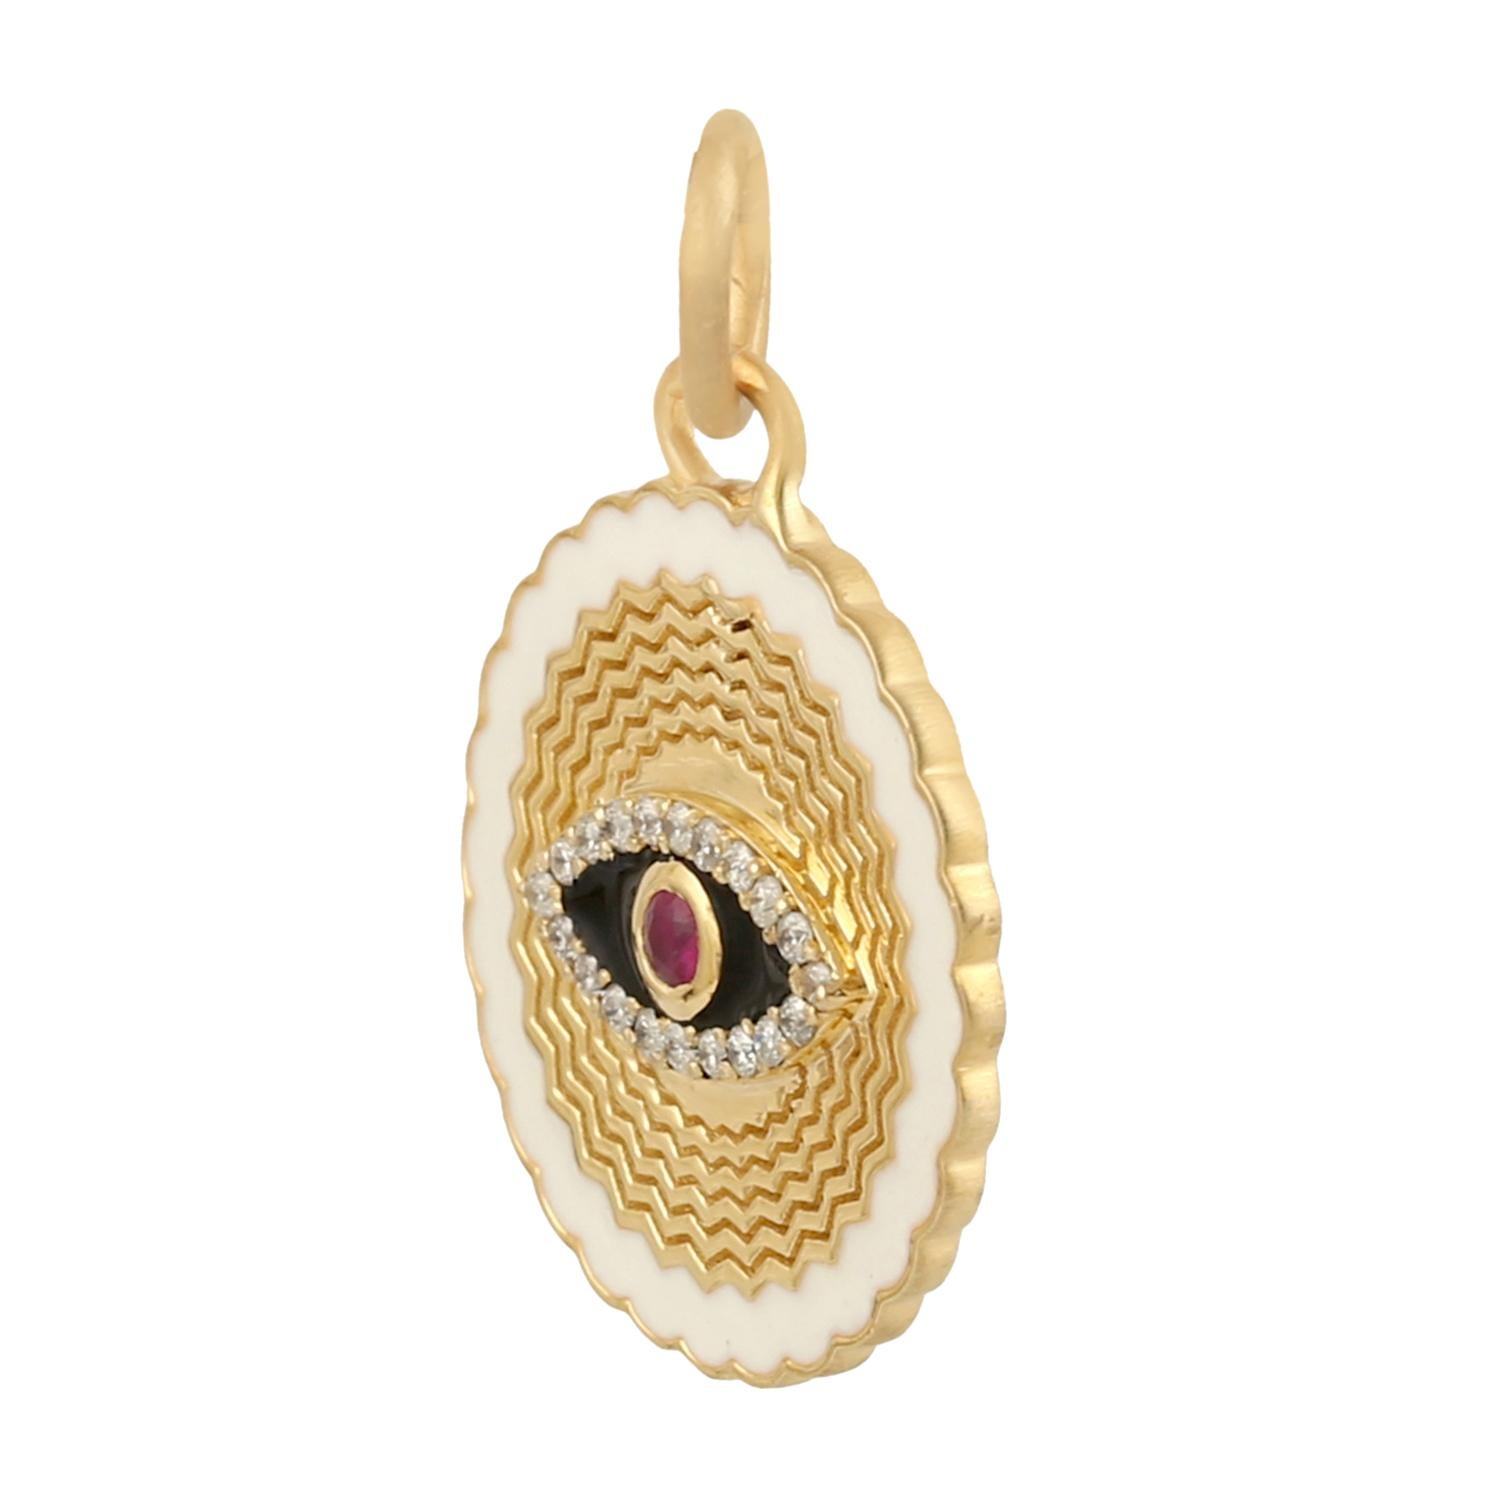 The 14 karat gold enamel pendant is hand set with .04 carats ruby and sparkling diamonds. 

FOLLOW MEGHNA JEWELS storefront to view the latest collection & exclusive pieces. Meghna Jewels is proudly rated as a Top Seller on 1stdibs with 5 star